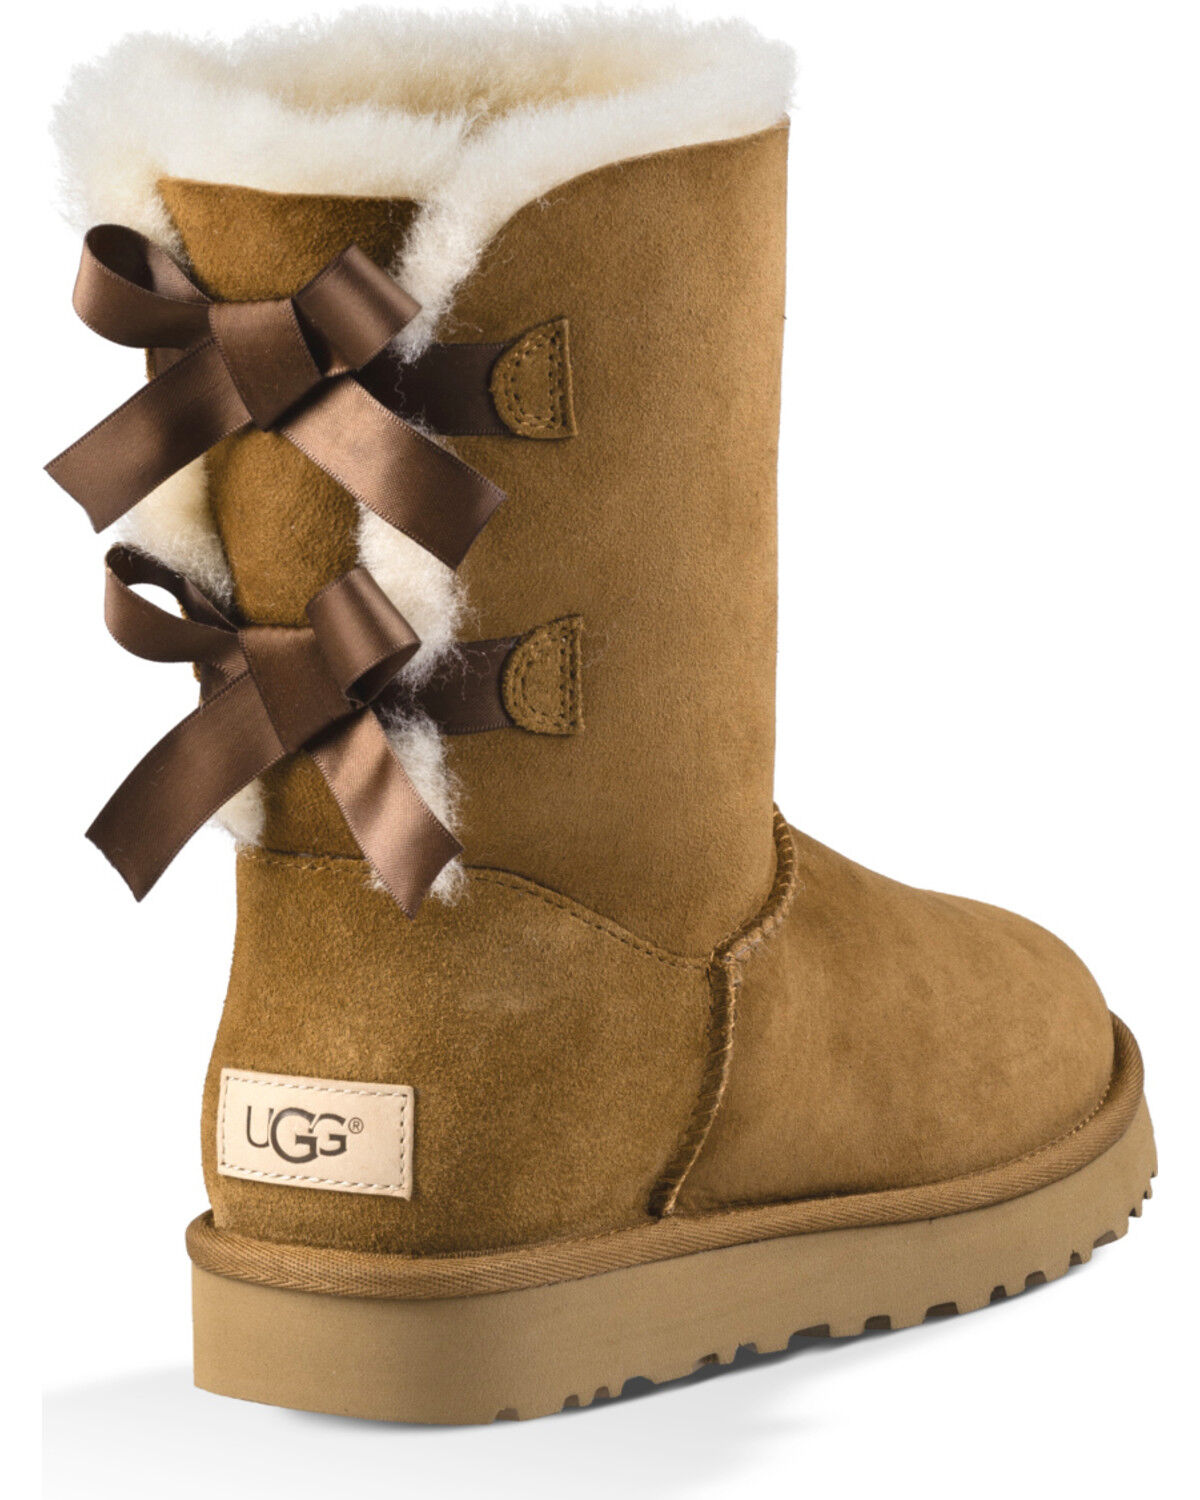 uggs with the bows